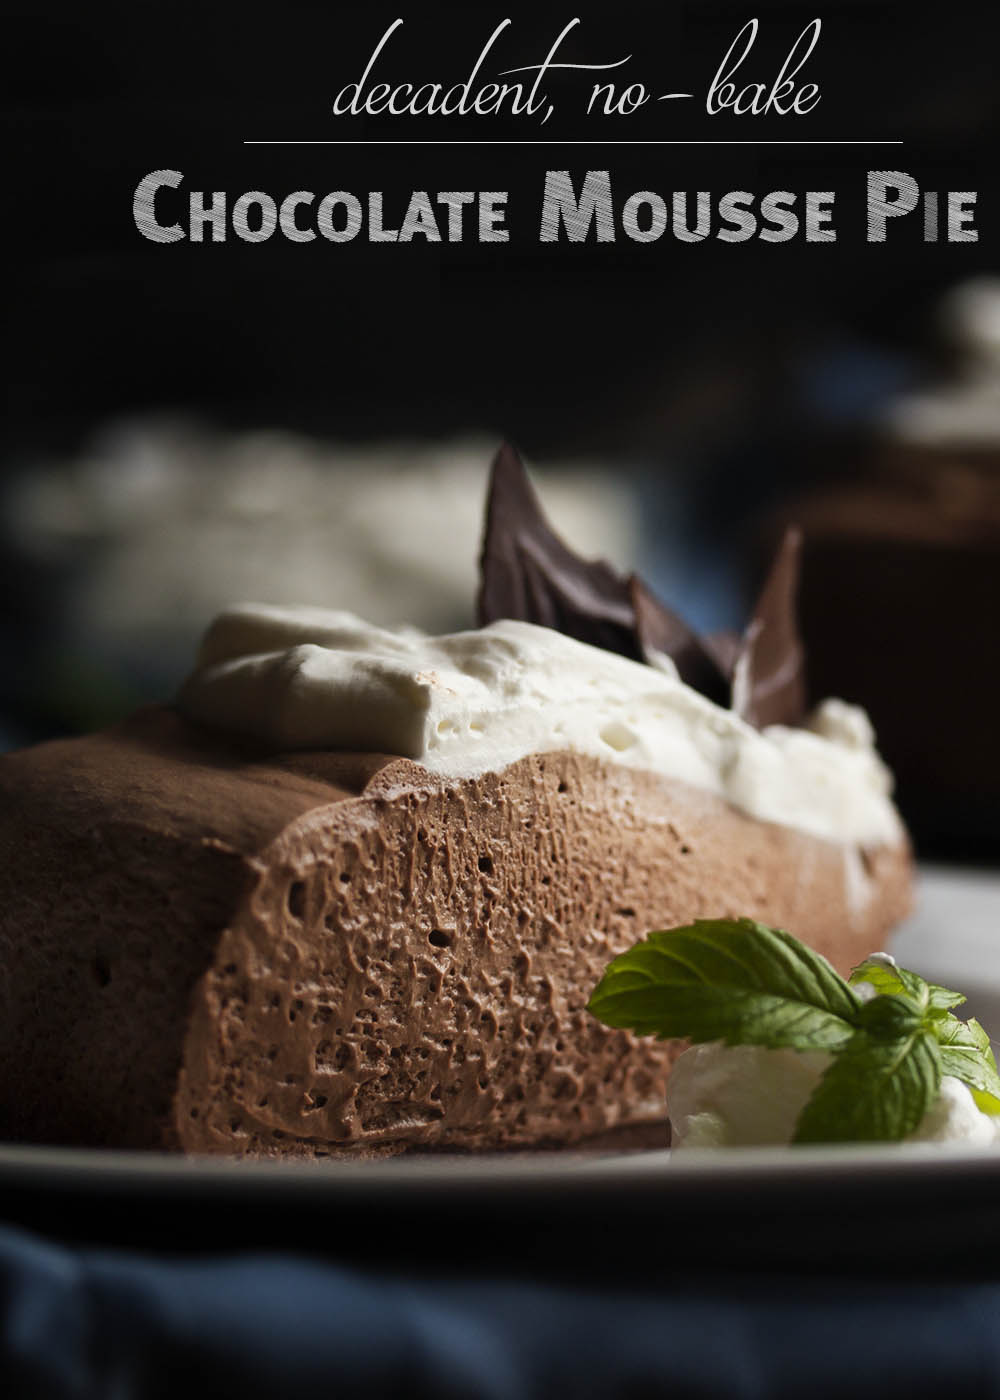 Dark Chocolate Mousse Pie - Dark chocolate whipped up into a creamy mousse layered over a crisp cookie crust and topped with mounds of whipped cream. Yum! | justalittlebitofbacon.com